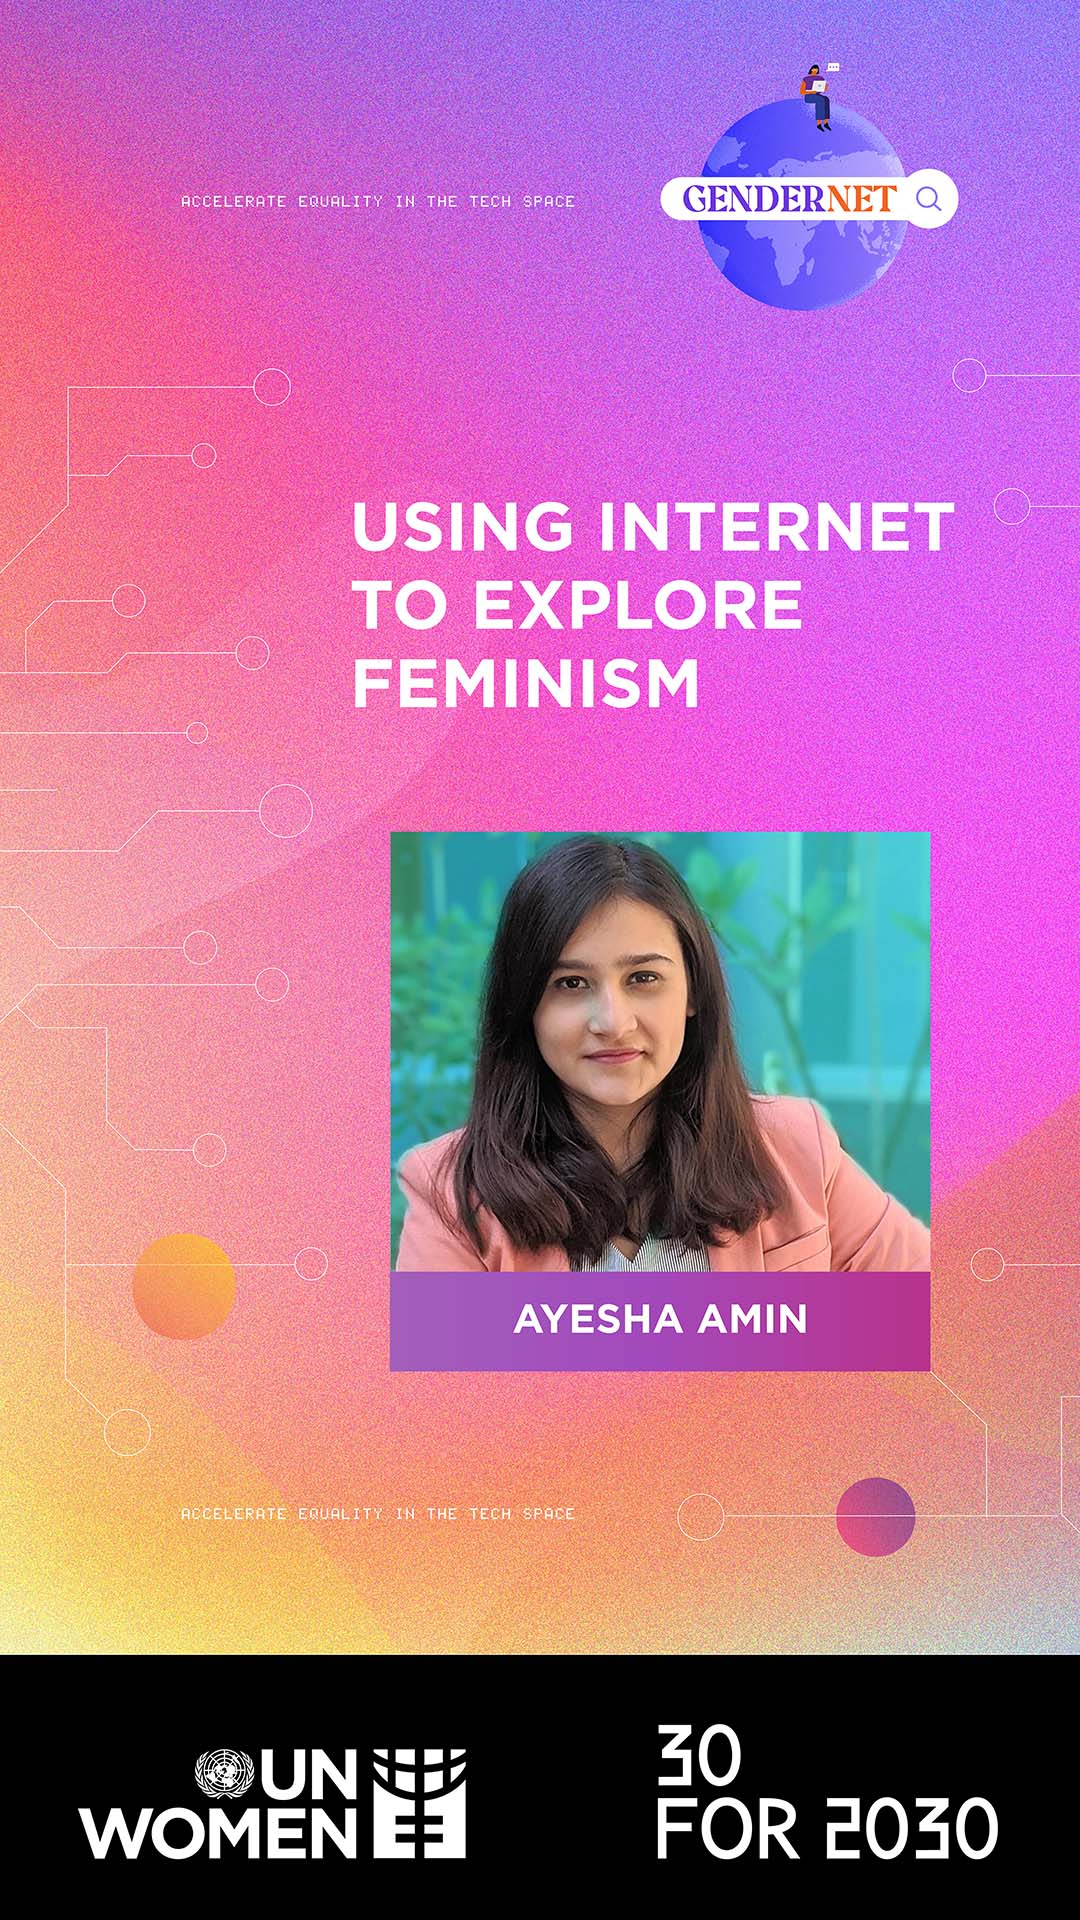 30 for 2030: Using the Internet to explore Feminism